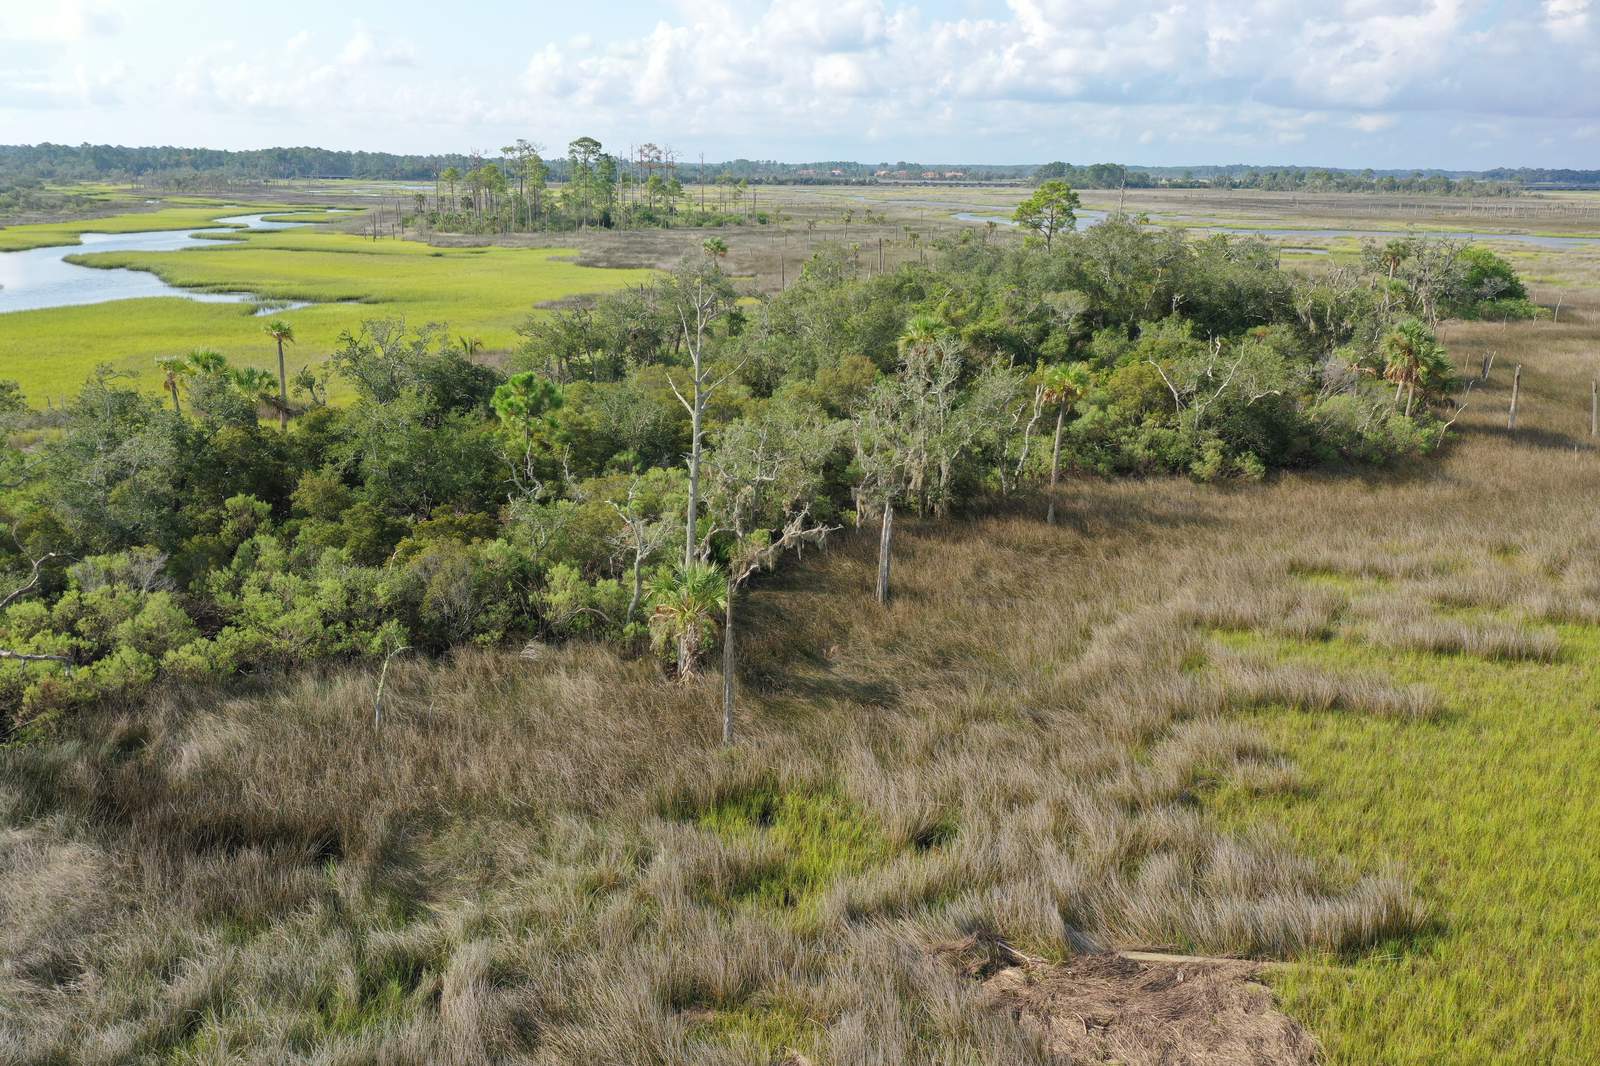 Land Trust must raise $350K to buy, preserve Intracoastal Waterway’s ‘Small Islands”